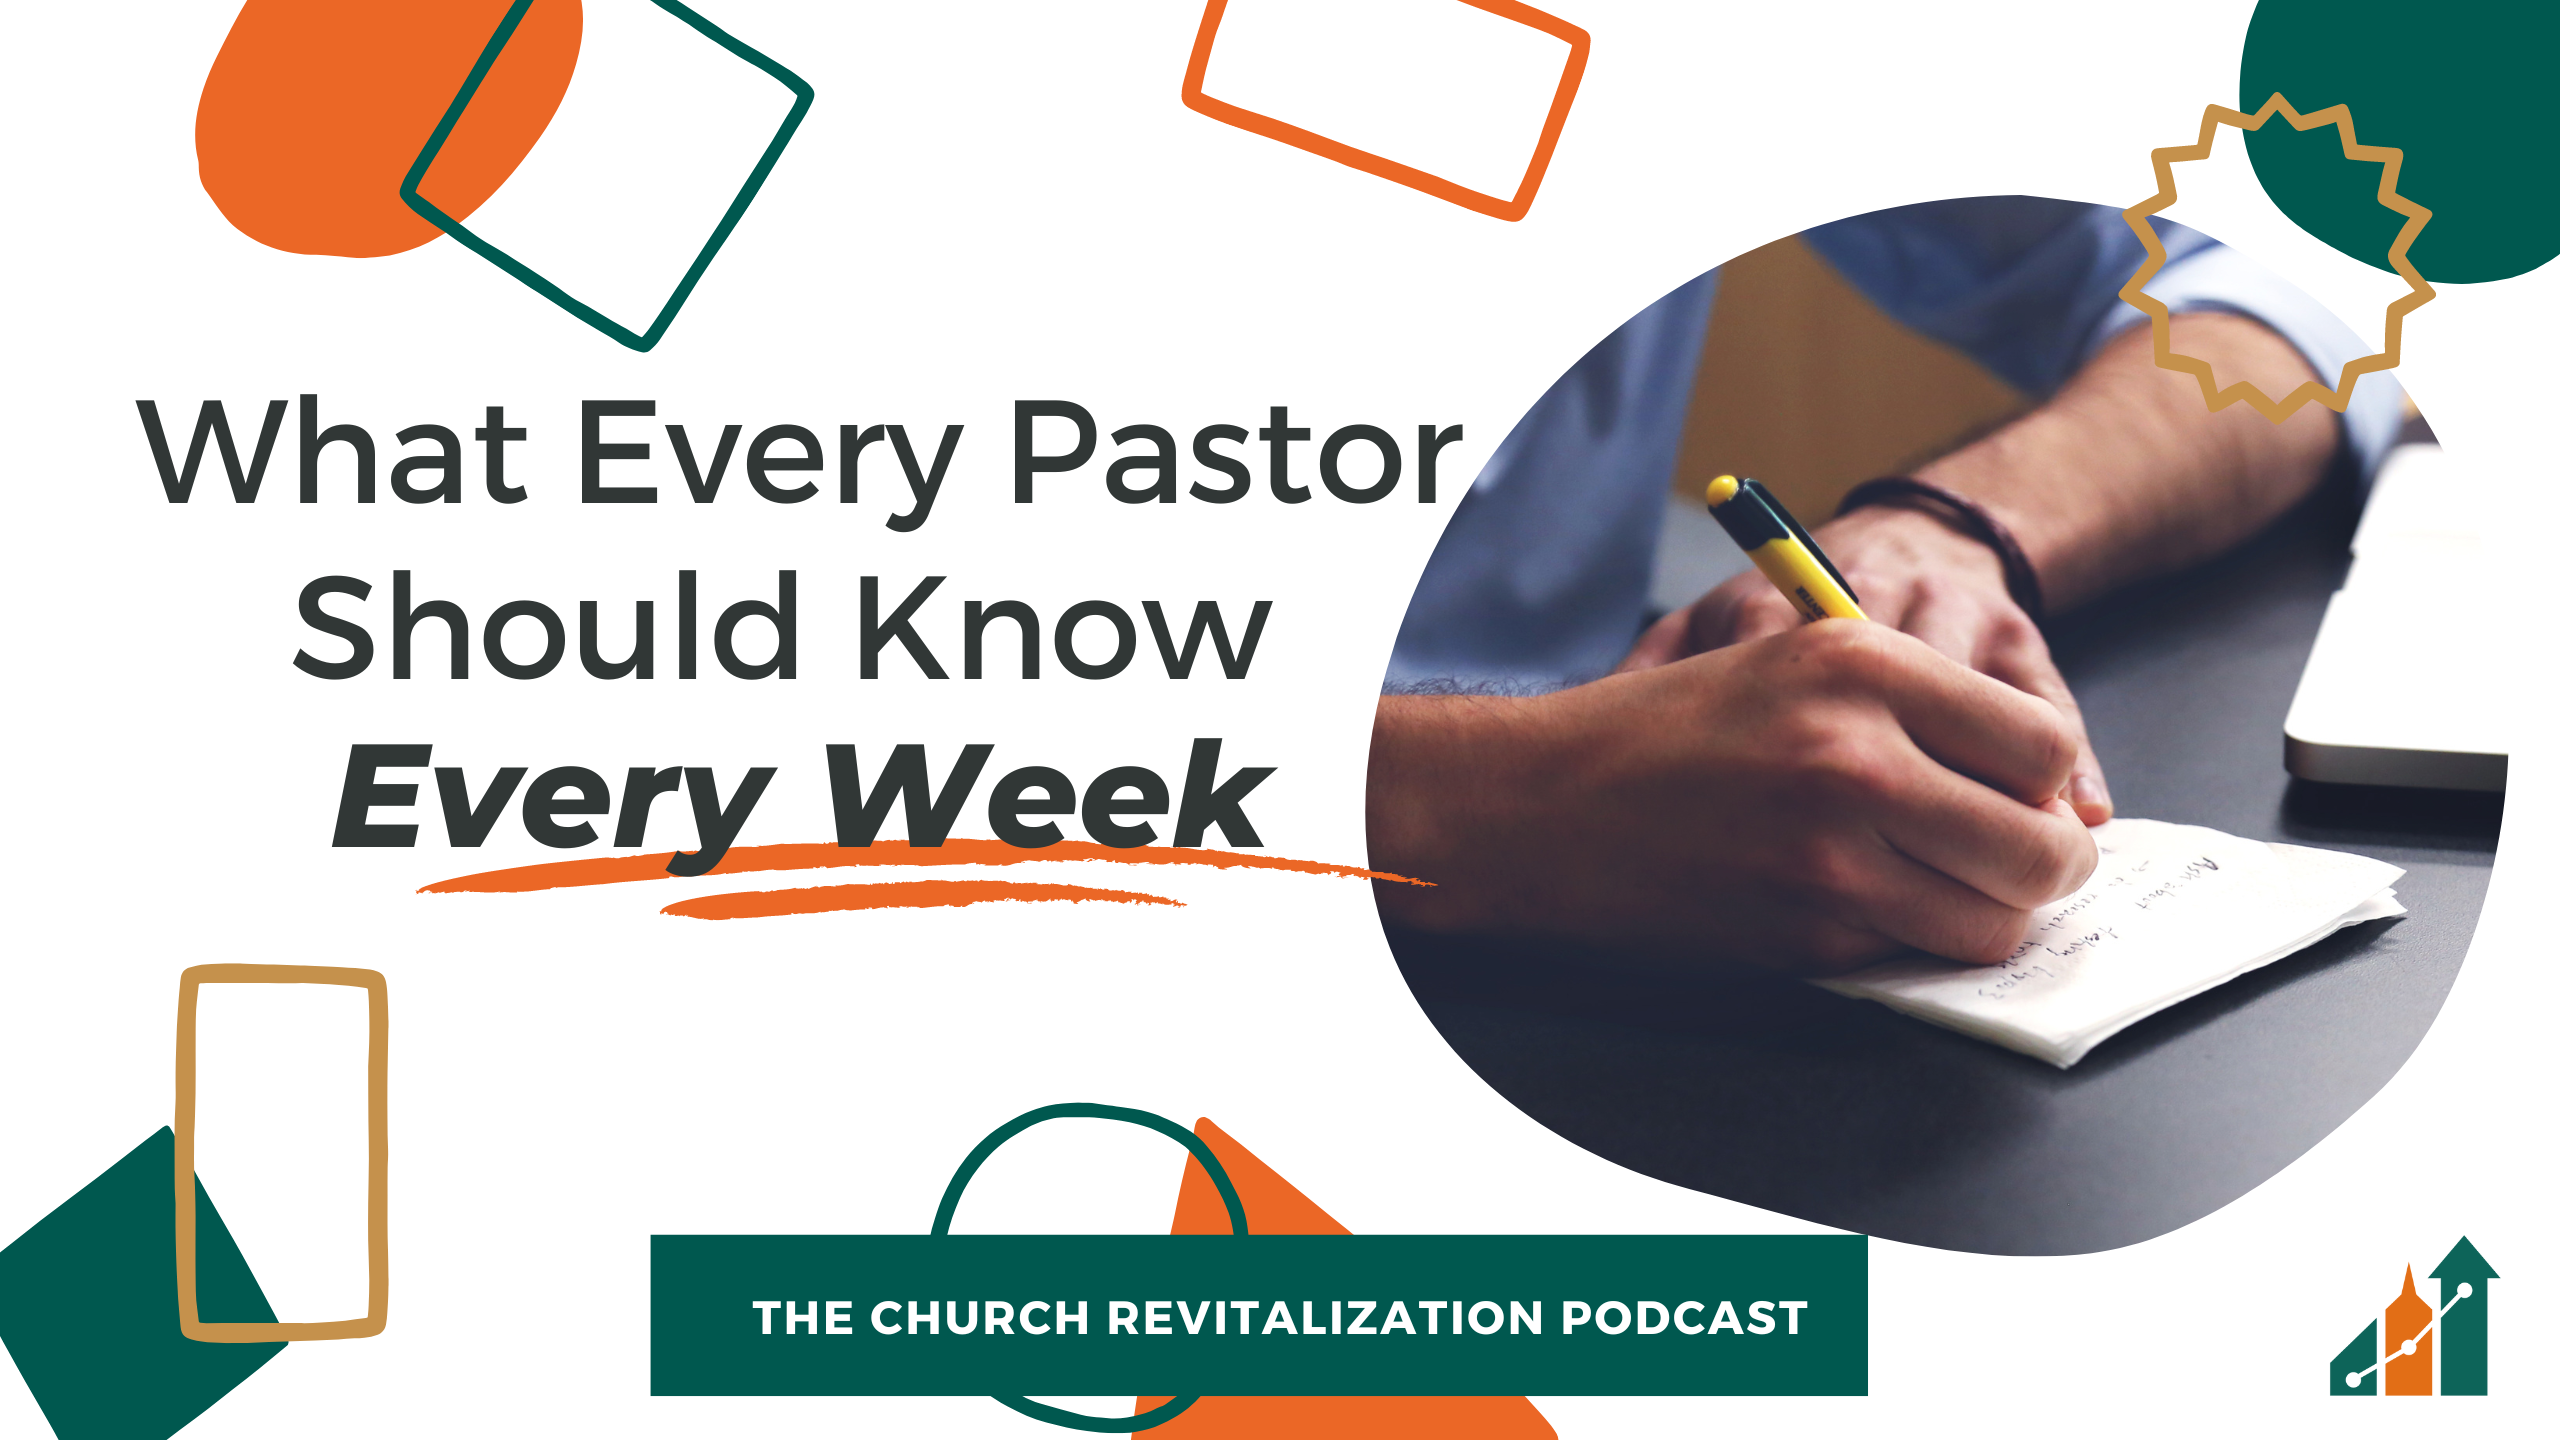 What Every Pastor Should Know Every Week